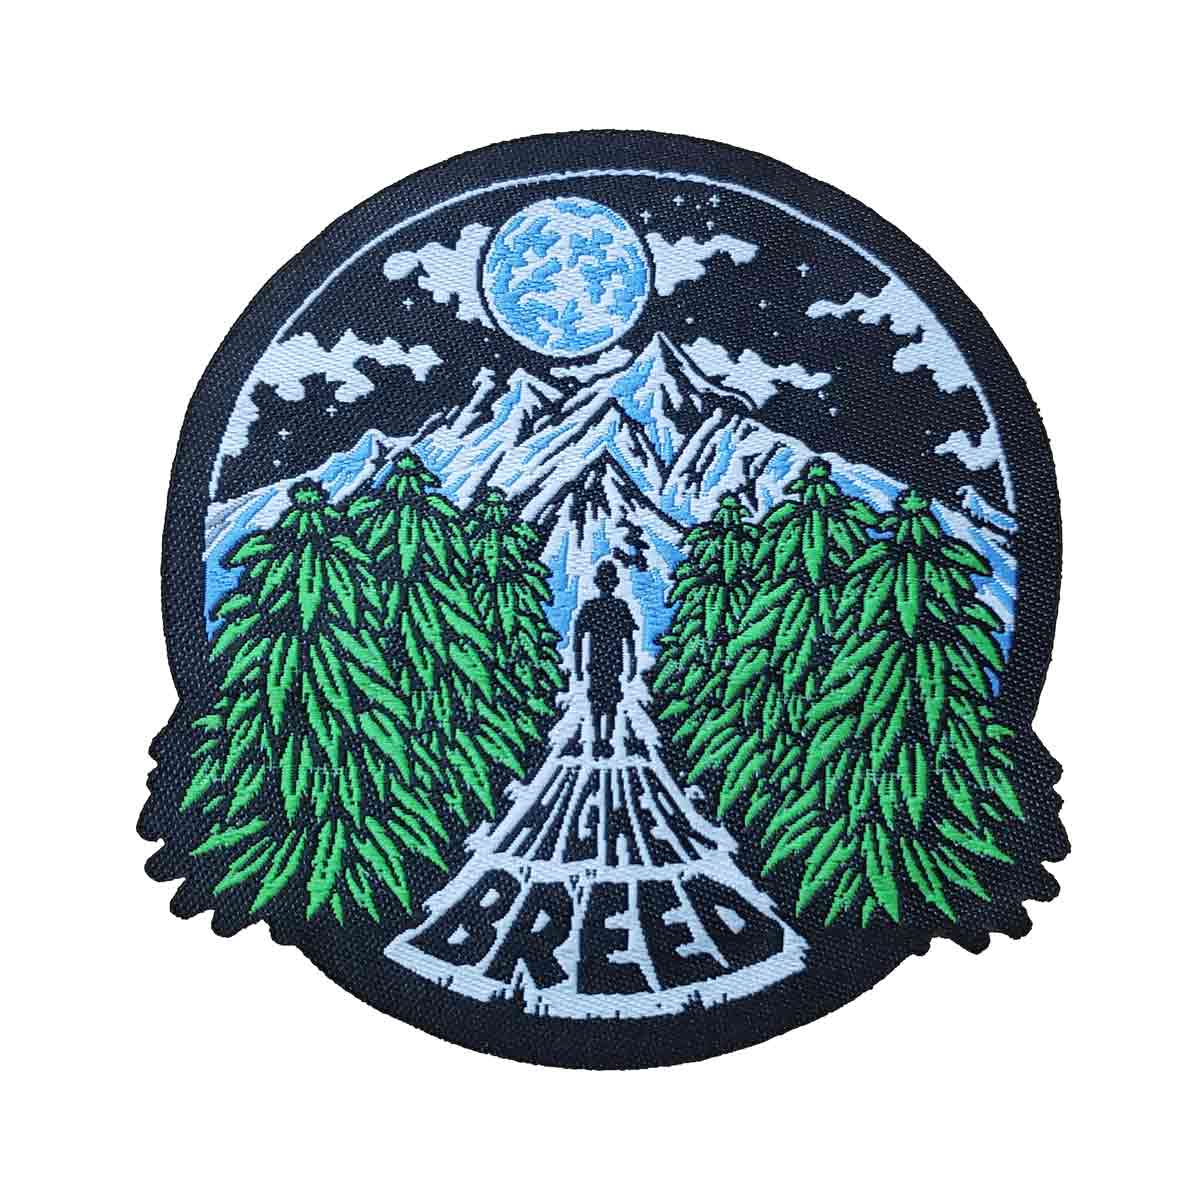 Higher Breed - Reefer Ridge - Patch